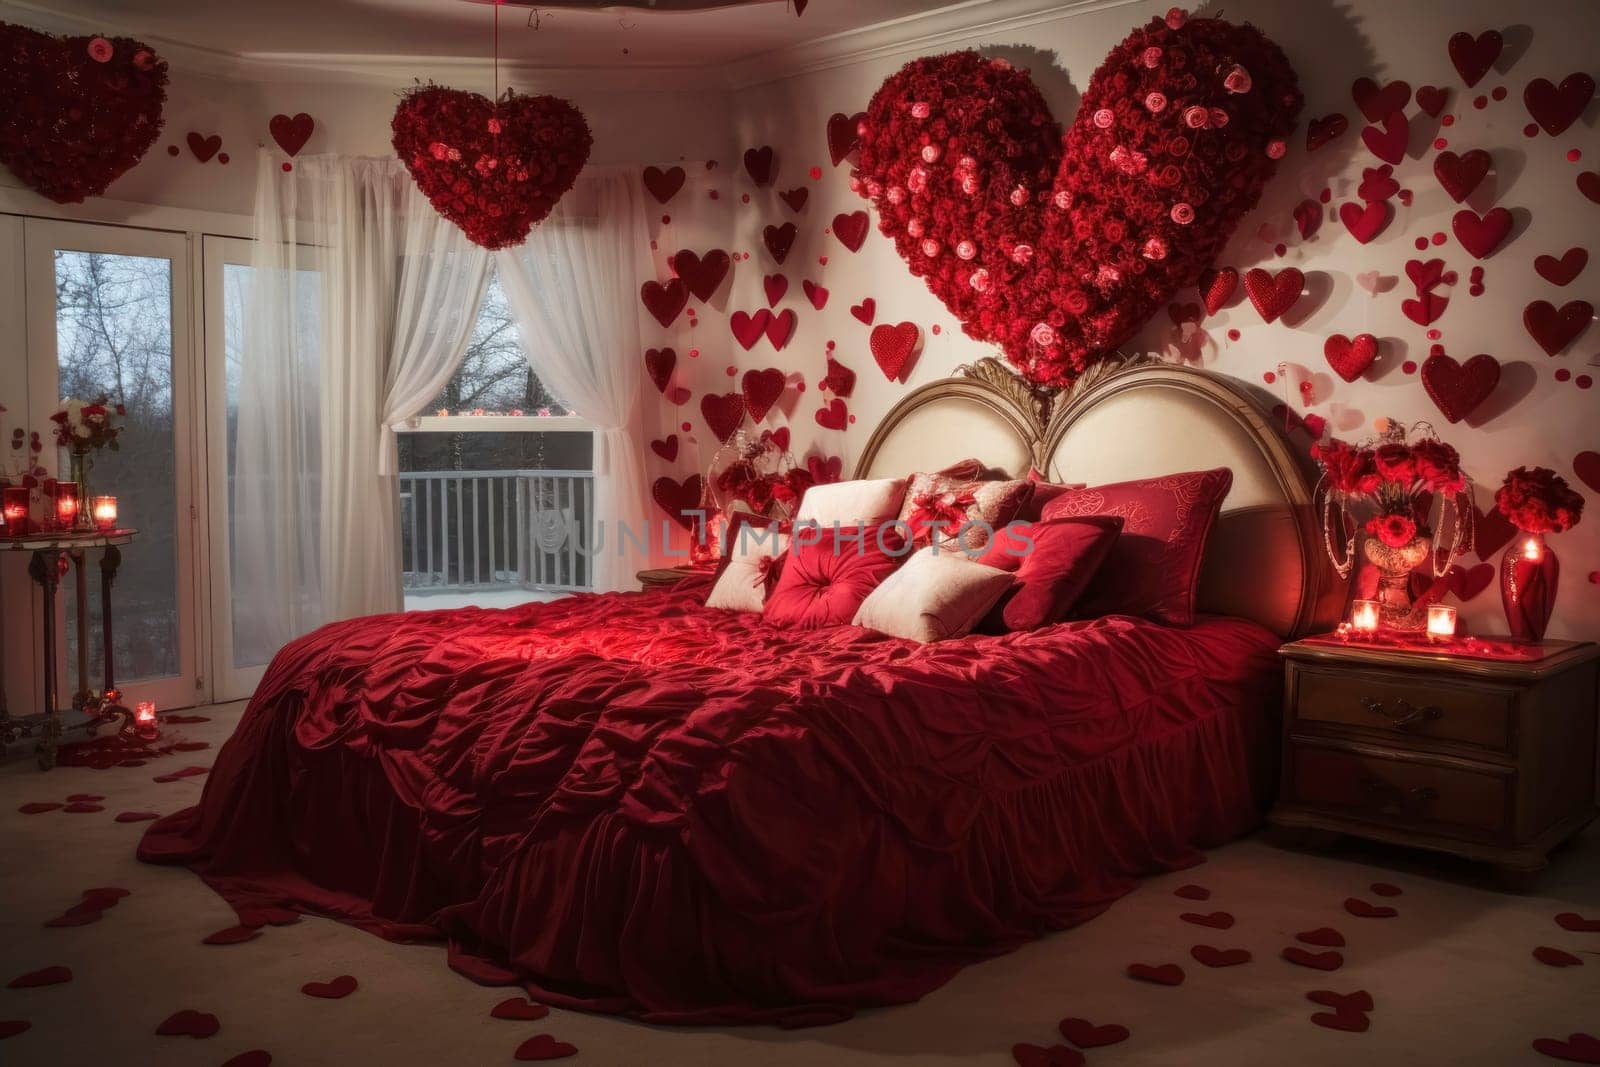 Valentine's Day Themed Bedroom with Heart Decorations by andreyz